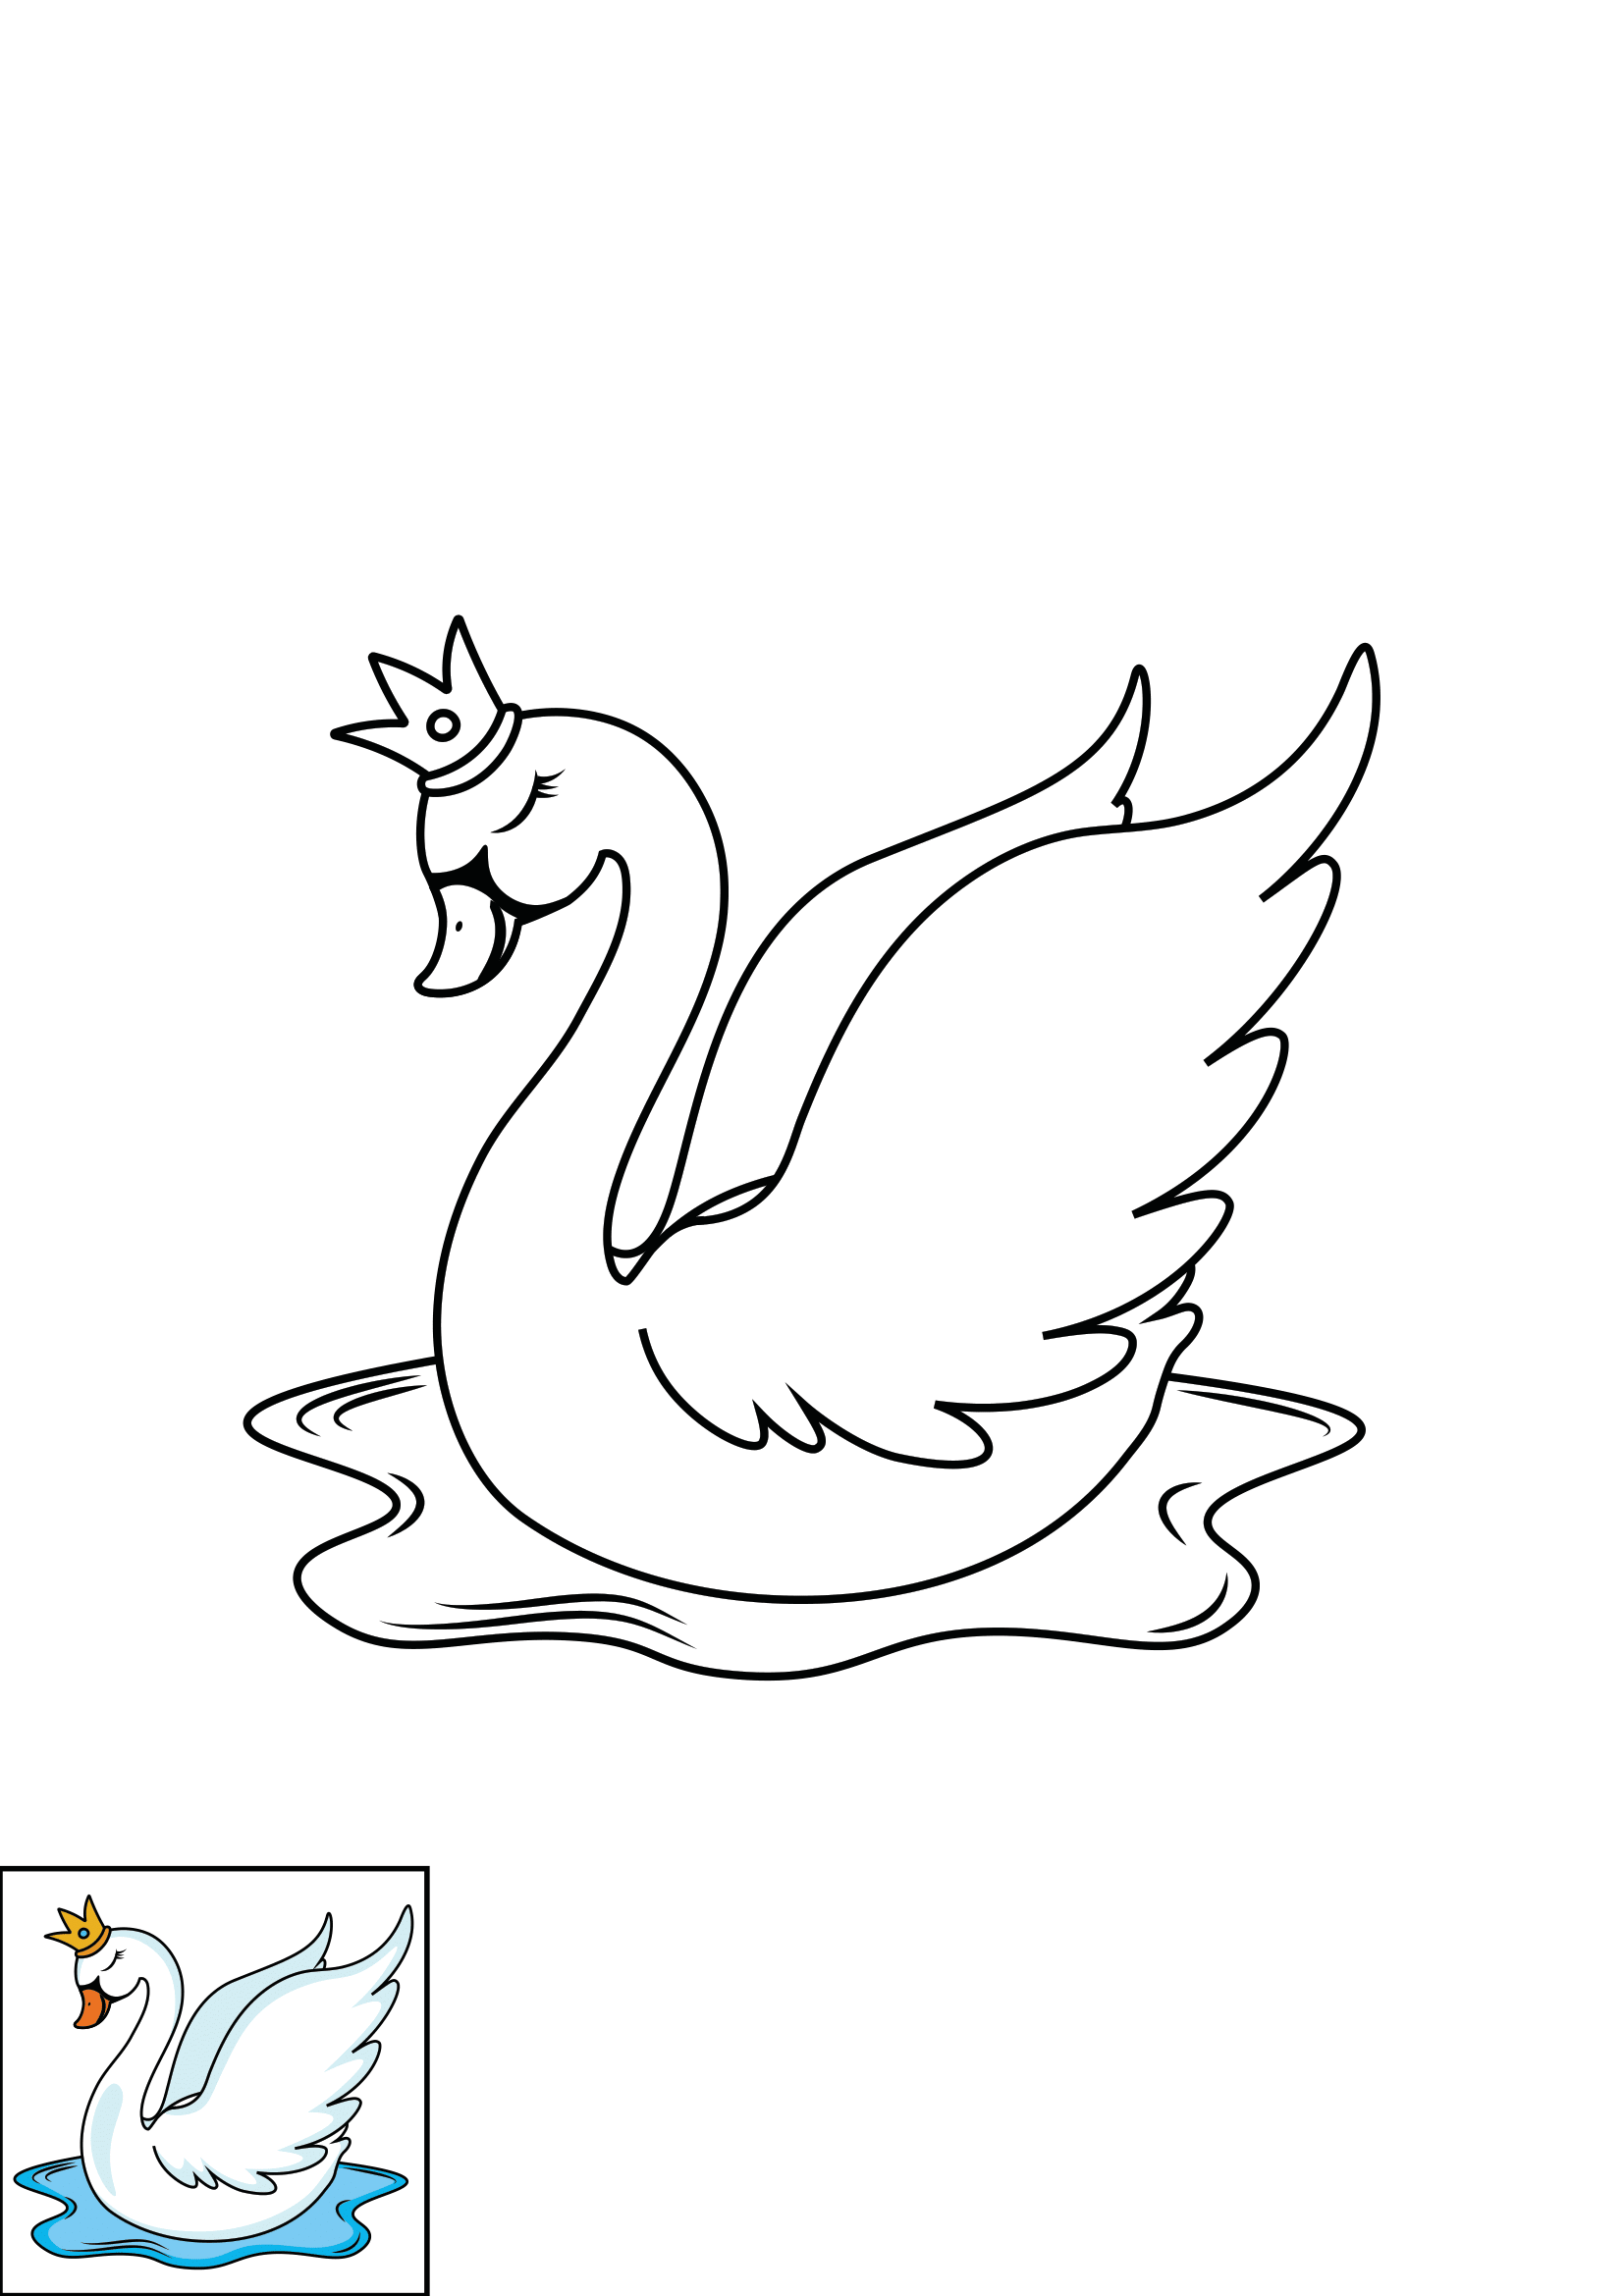 How to Draw A Swan Step by Step Printable Color